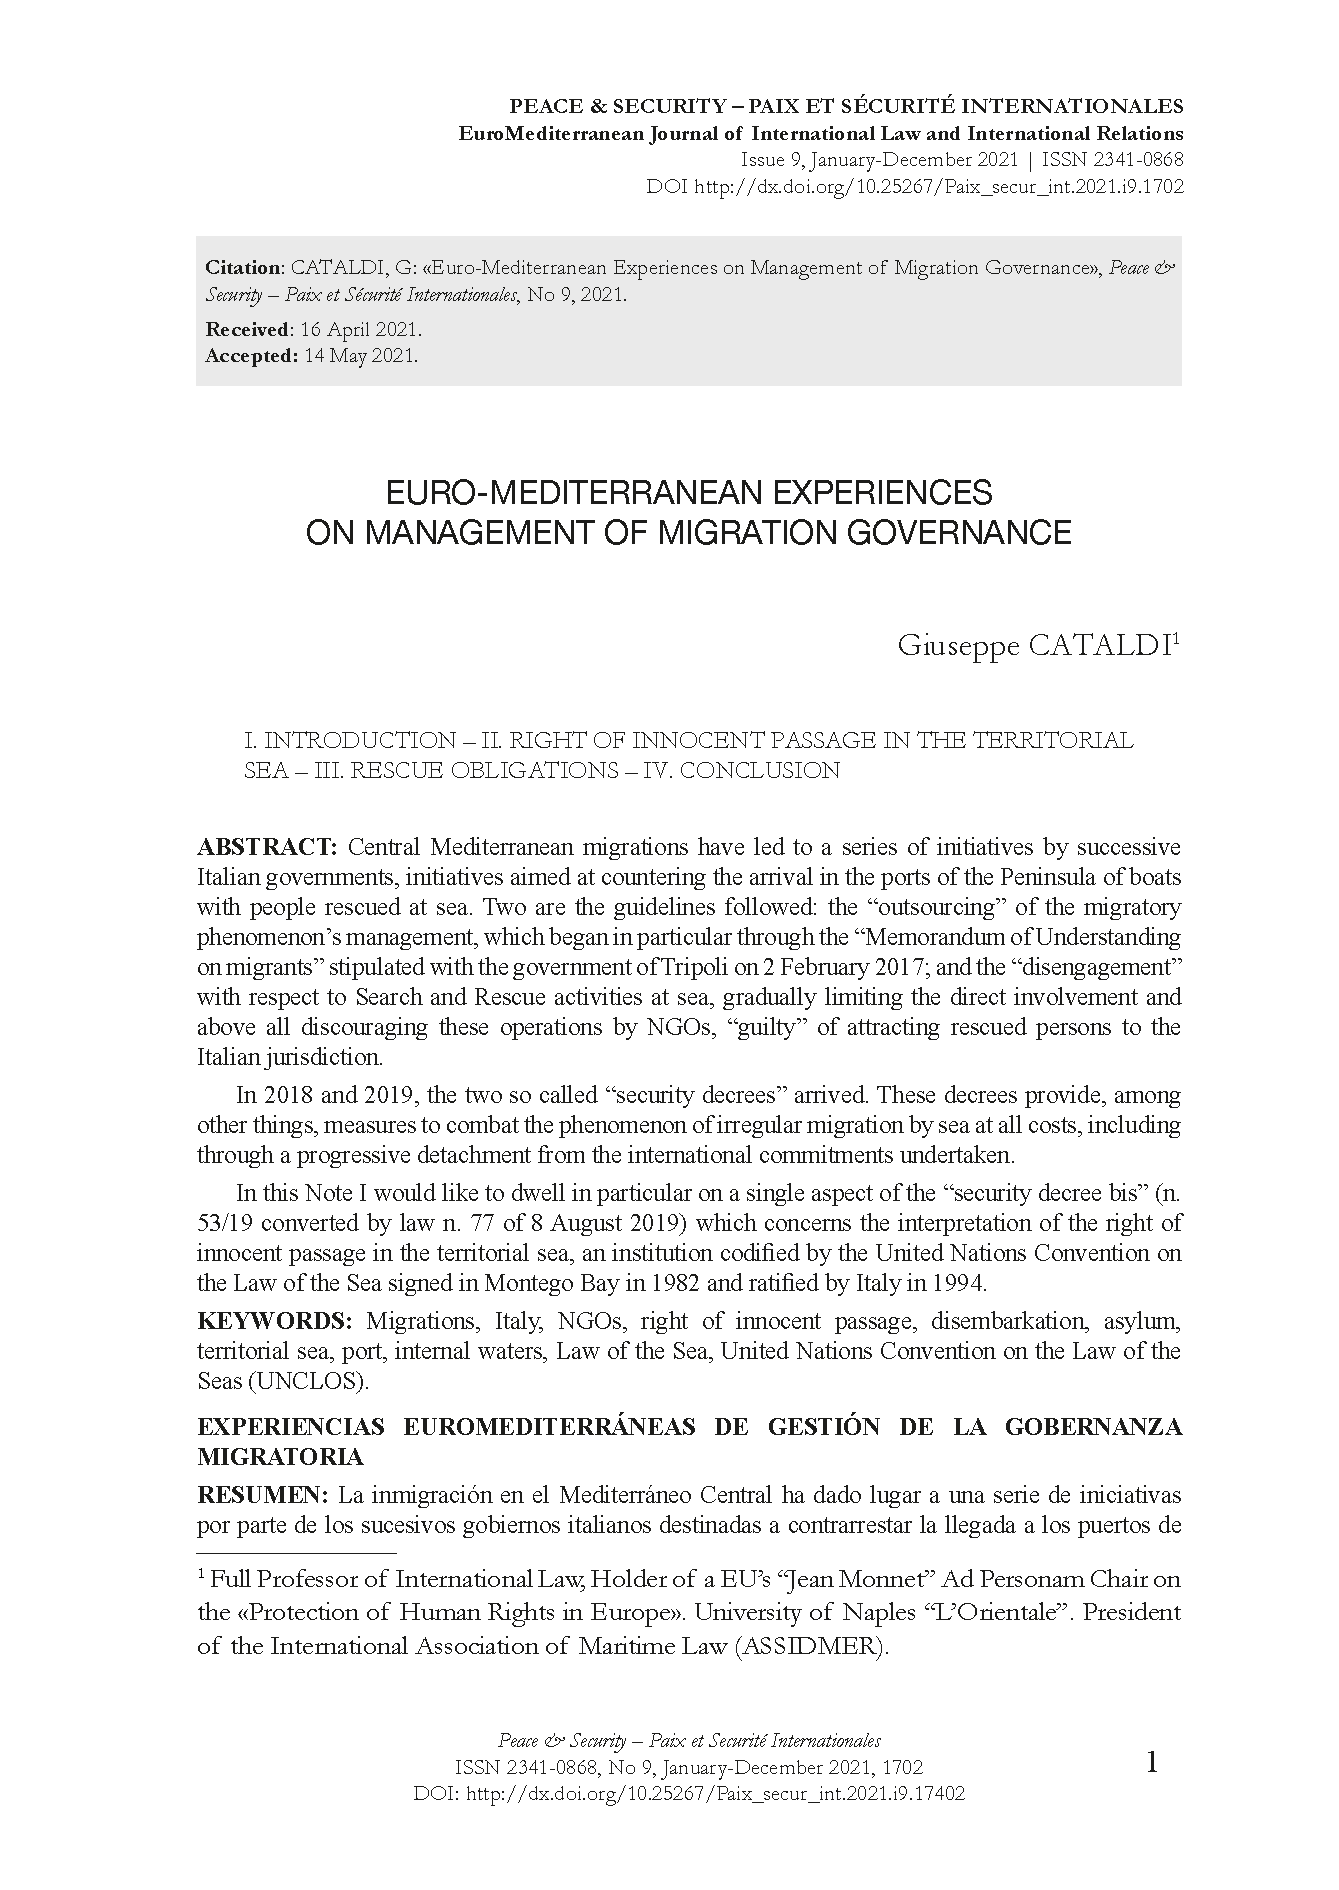 Euro-Mediterranean Experiences on Management of Migration Governance